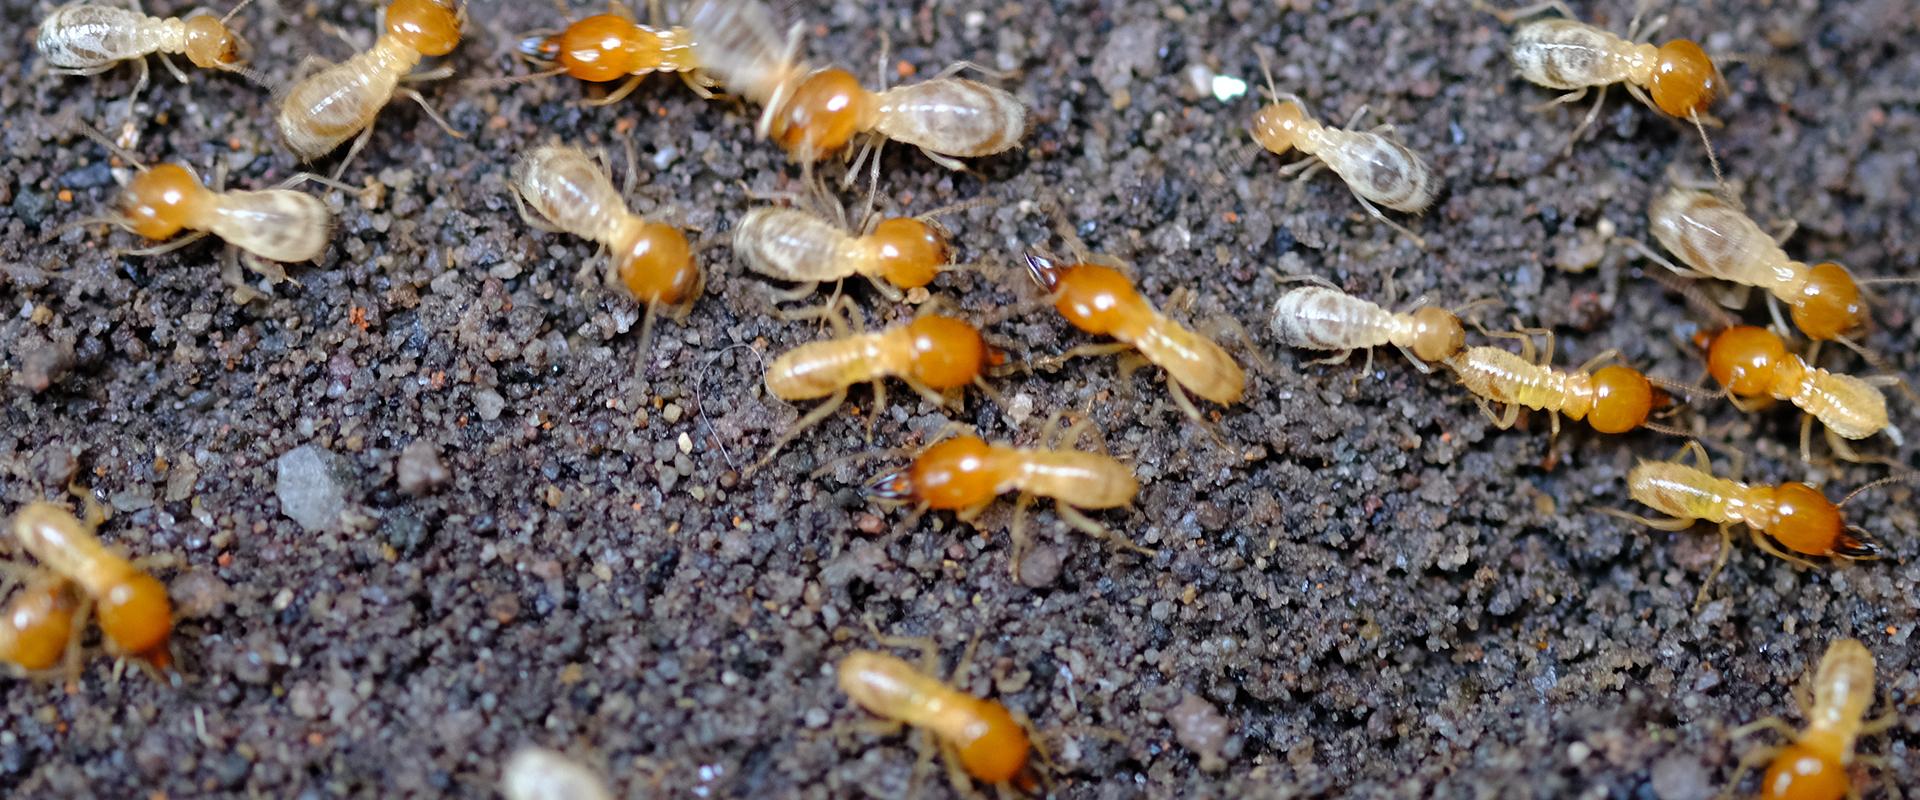 termites on the dirt